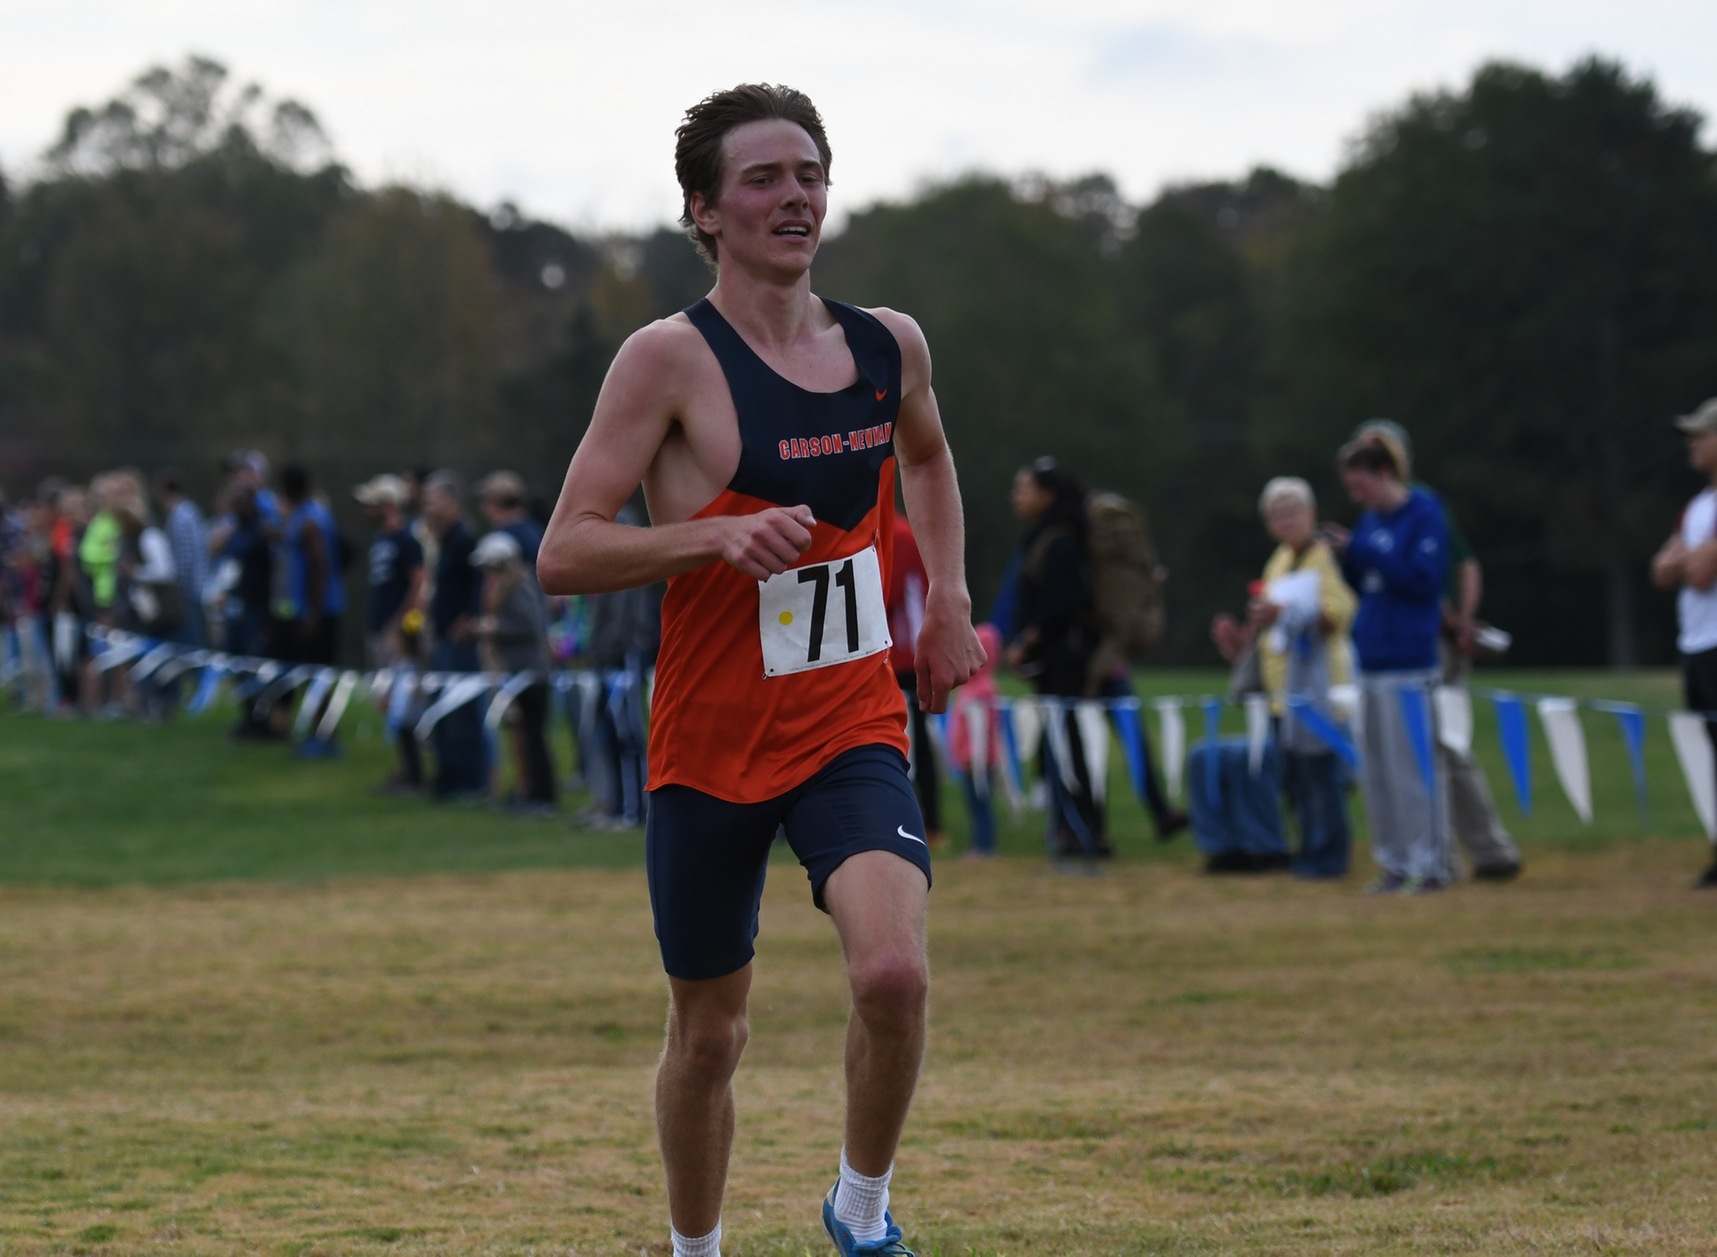 Greer advances to Nationals, men finish in 12th place while women finish in 14th